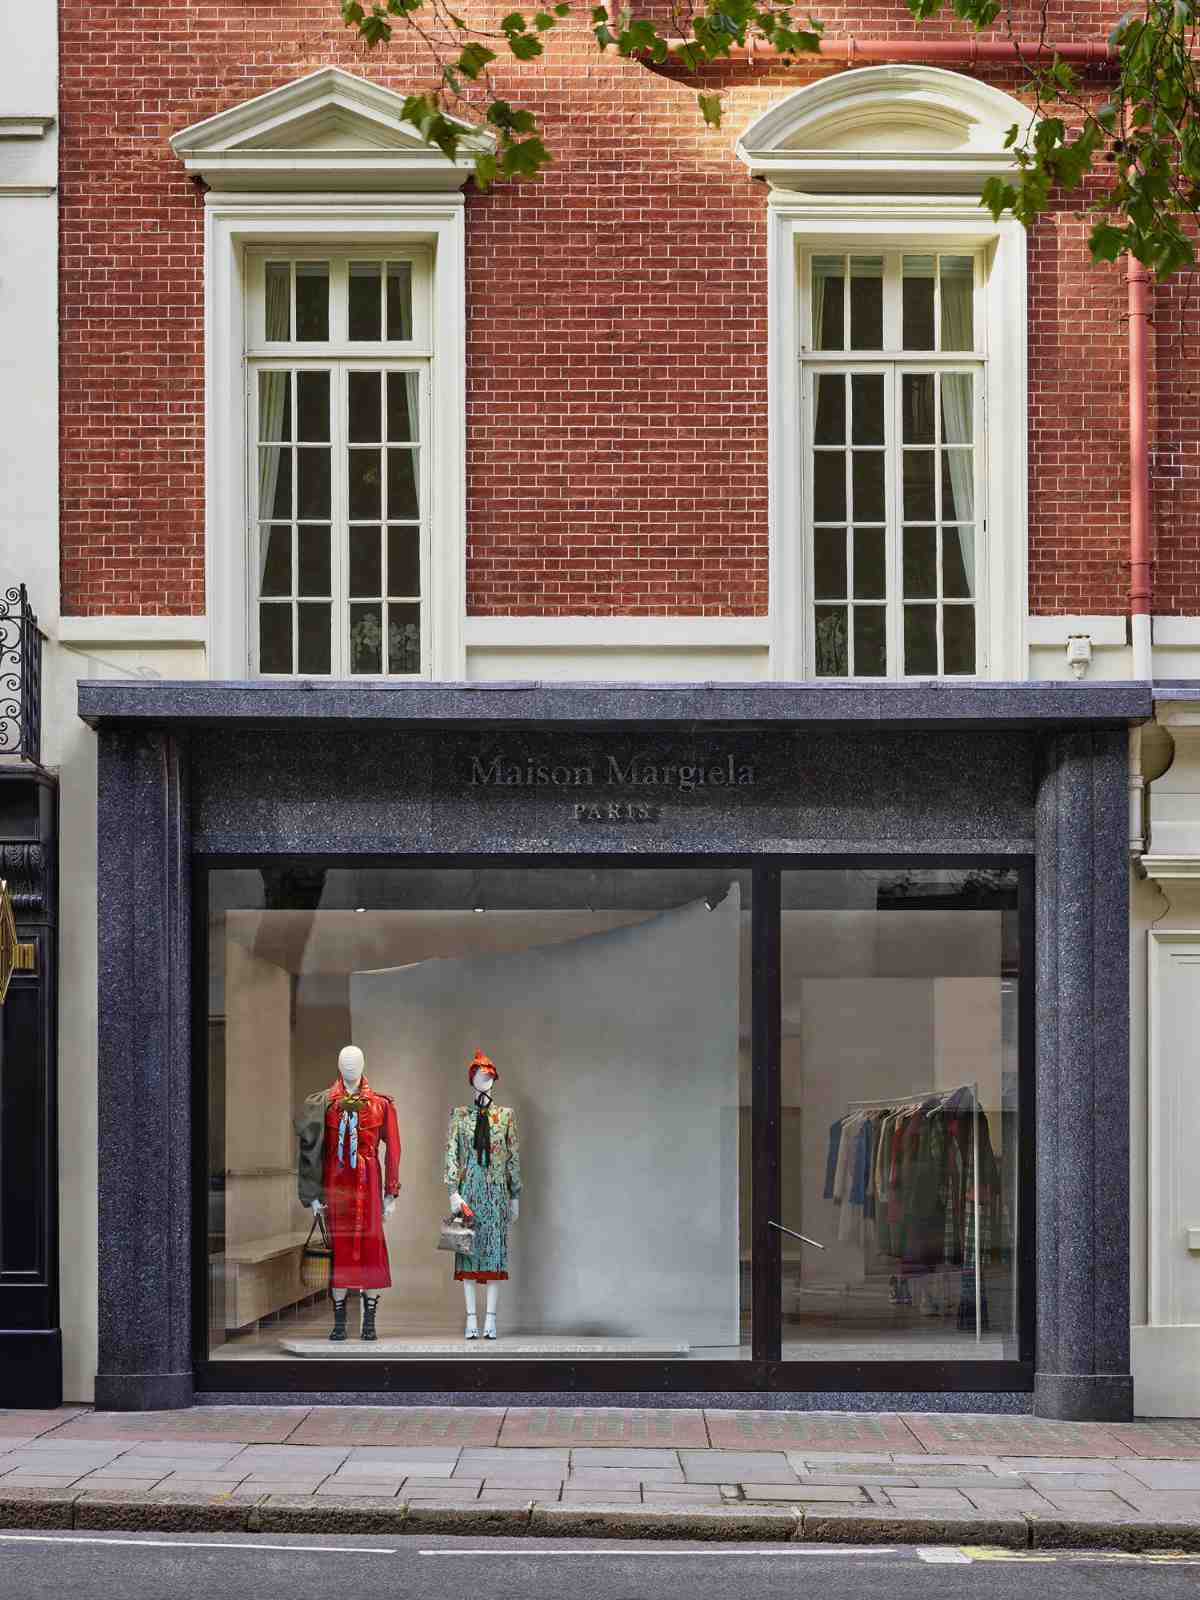 New openings of luxury boutiques - January 2021